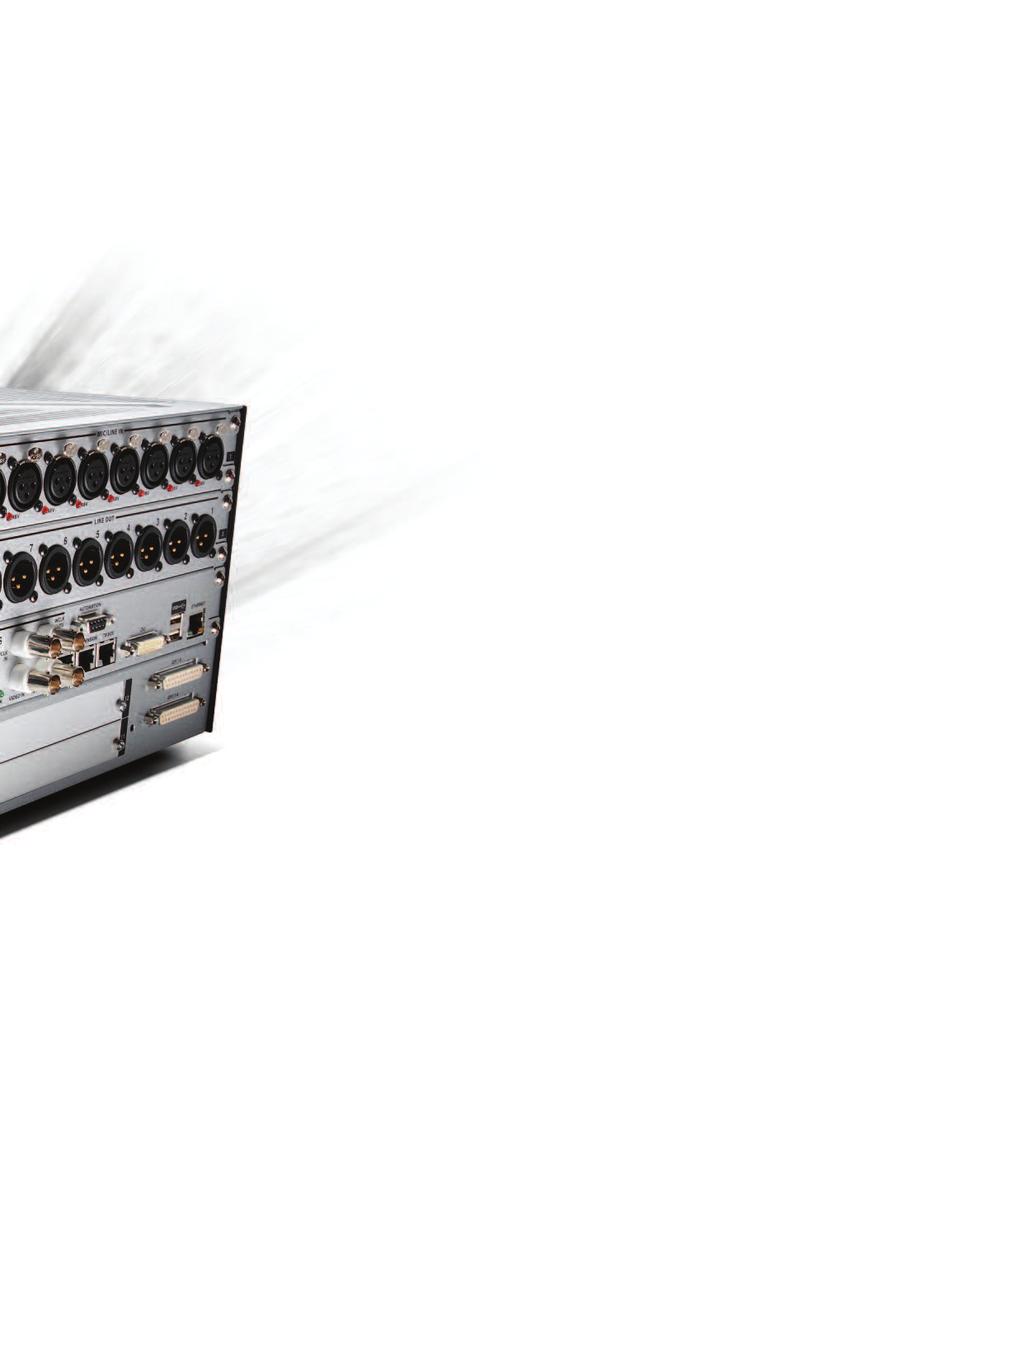 Optional D21m I/O modules MADI Provides up to 64 channels of MADI I/O. The MADI card features optical inputs for fibre connections. ADAT Optical input for two 8-channel ADAT connections.